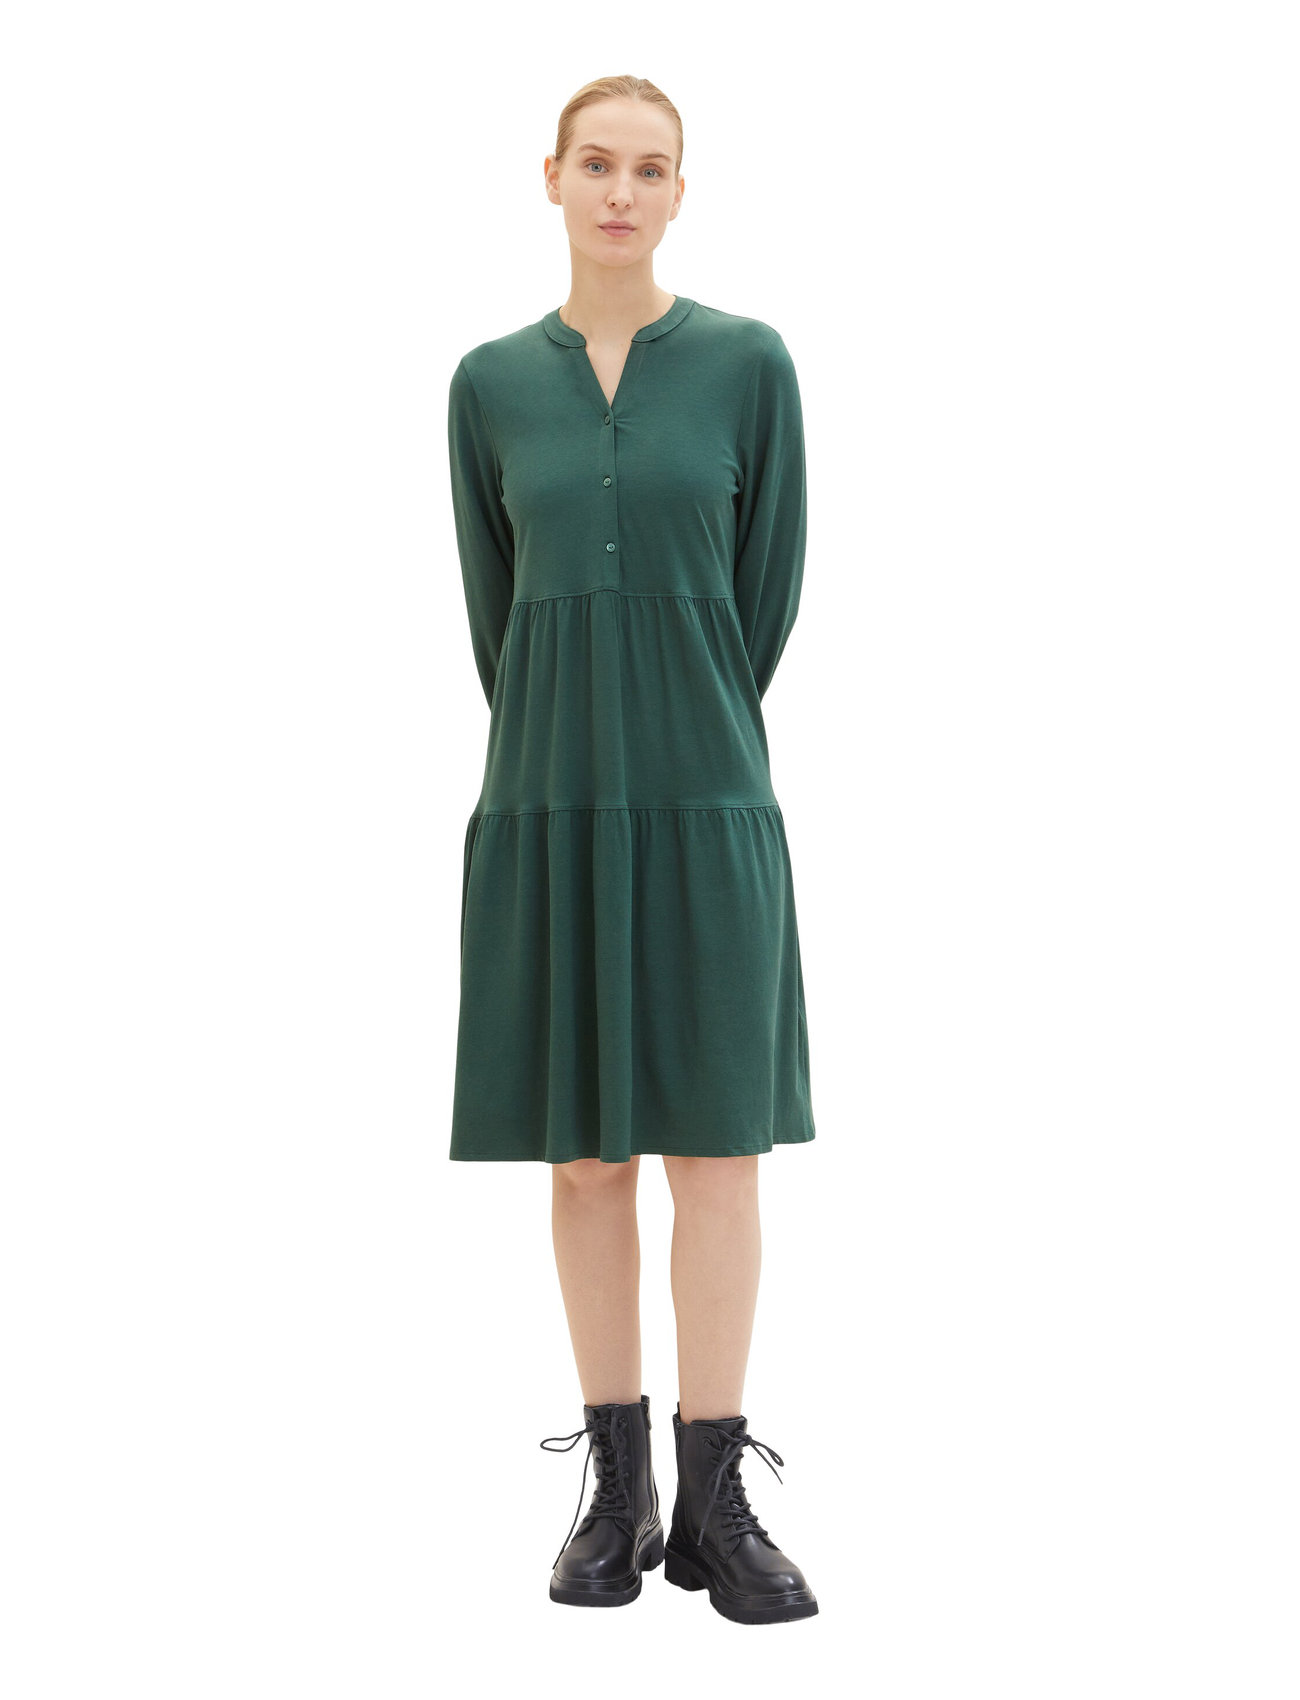 - Short Tom Jersey Dress Dresses Volants With Tailor